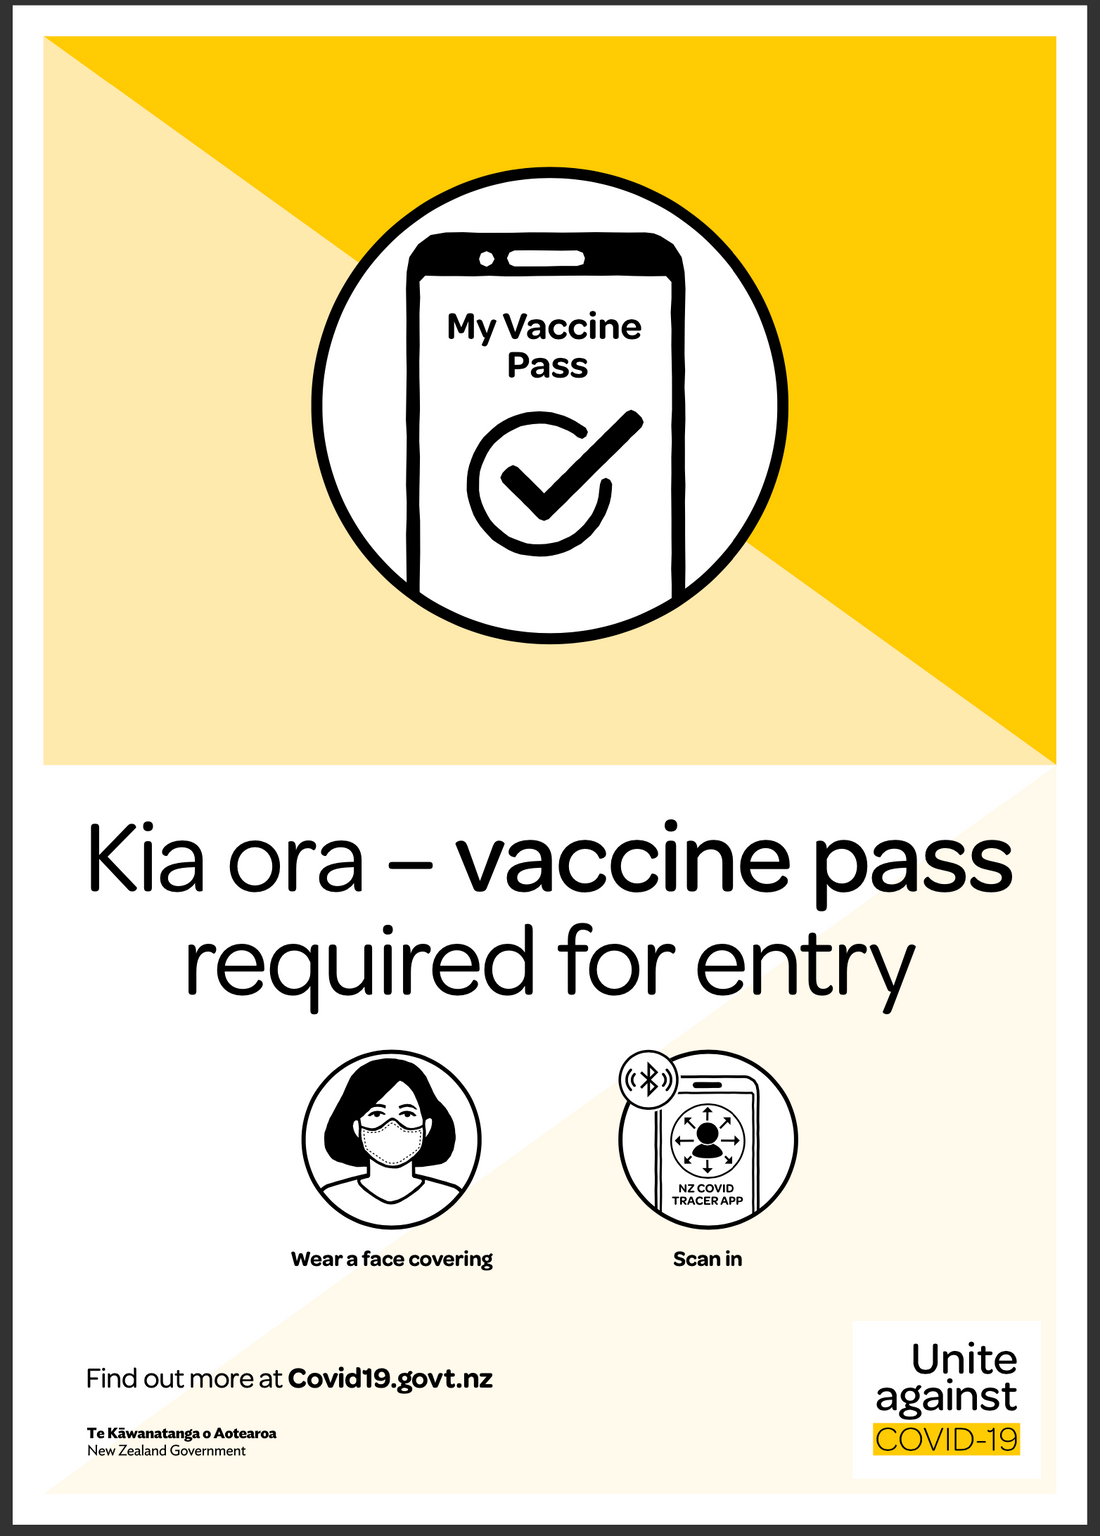 In the Era of the Covid-19 Protection Framework & My Vaccine Pass